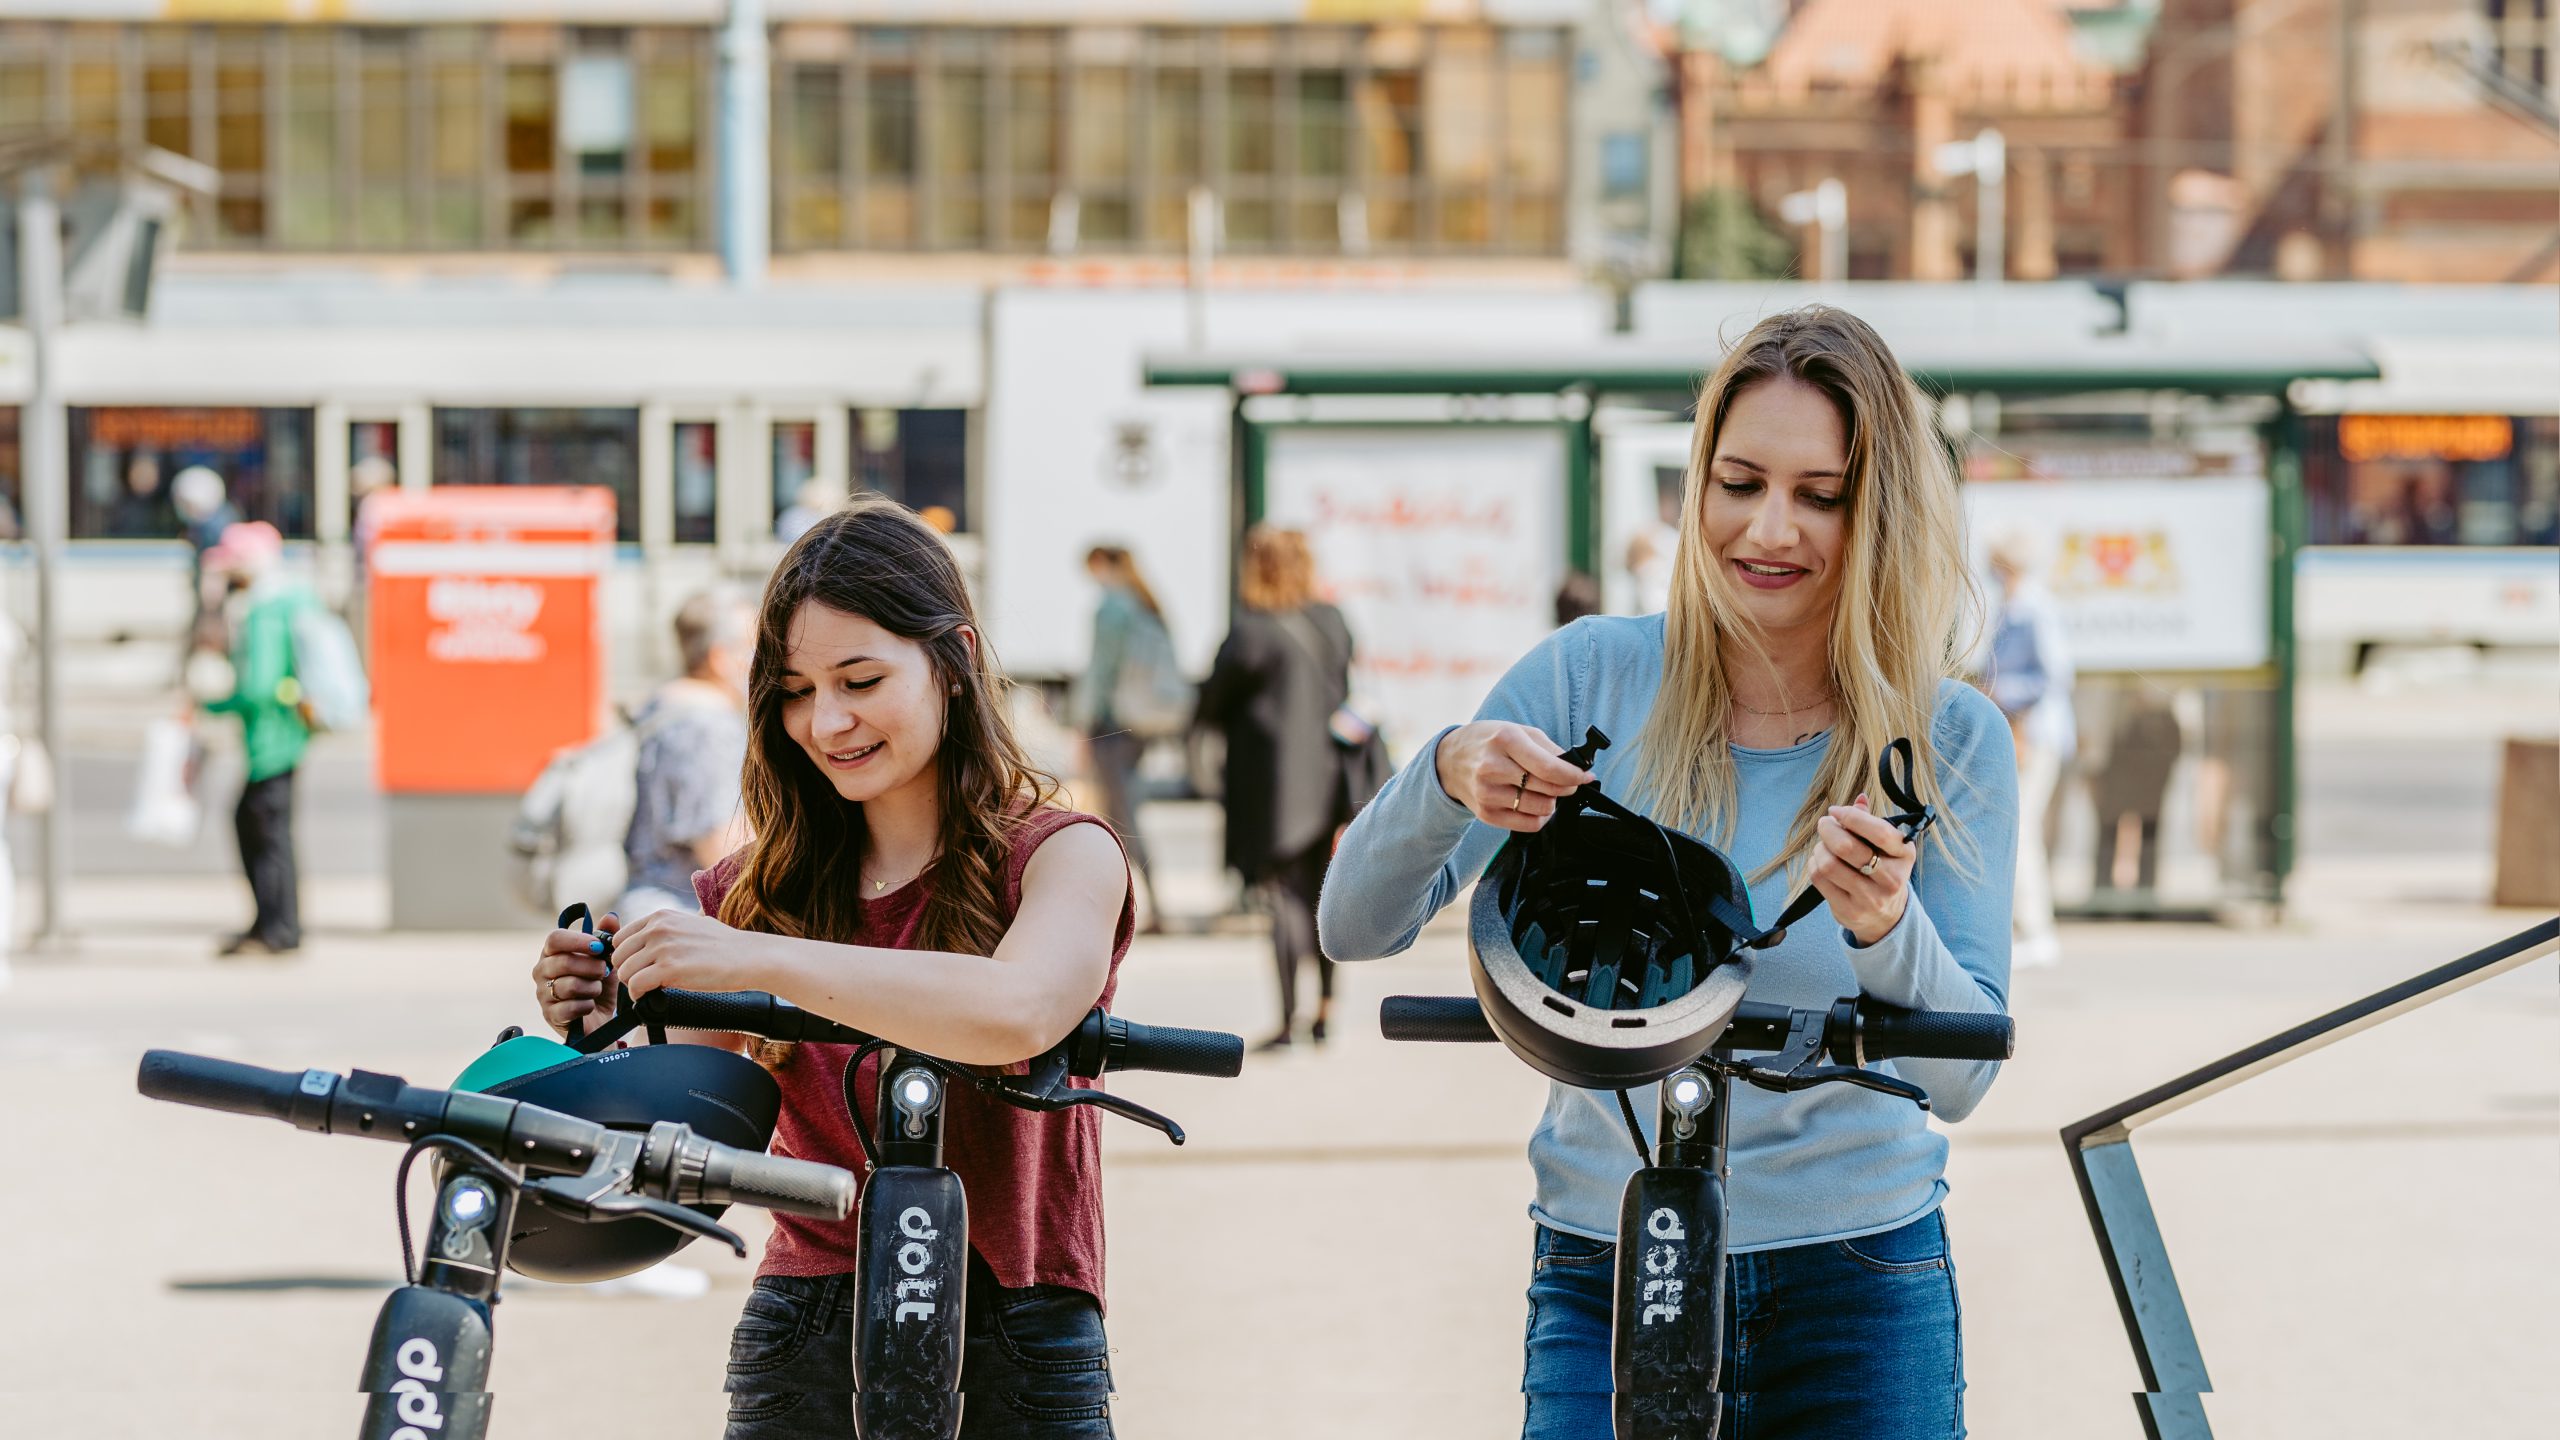 Two women standing at Dott scooters in a sunny European street getting ready to put their helmets on.